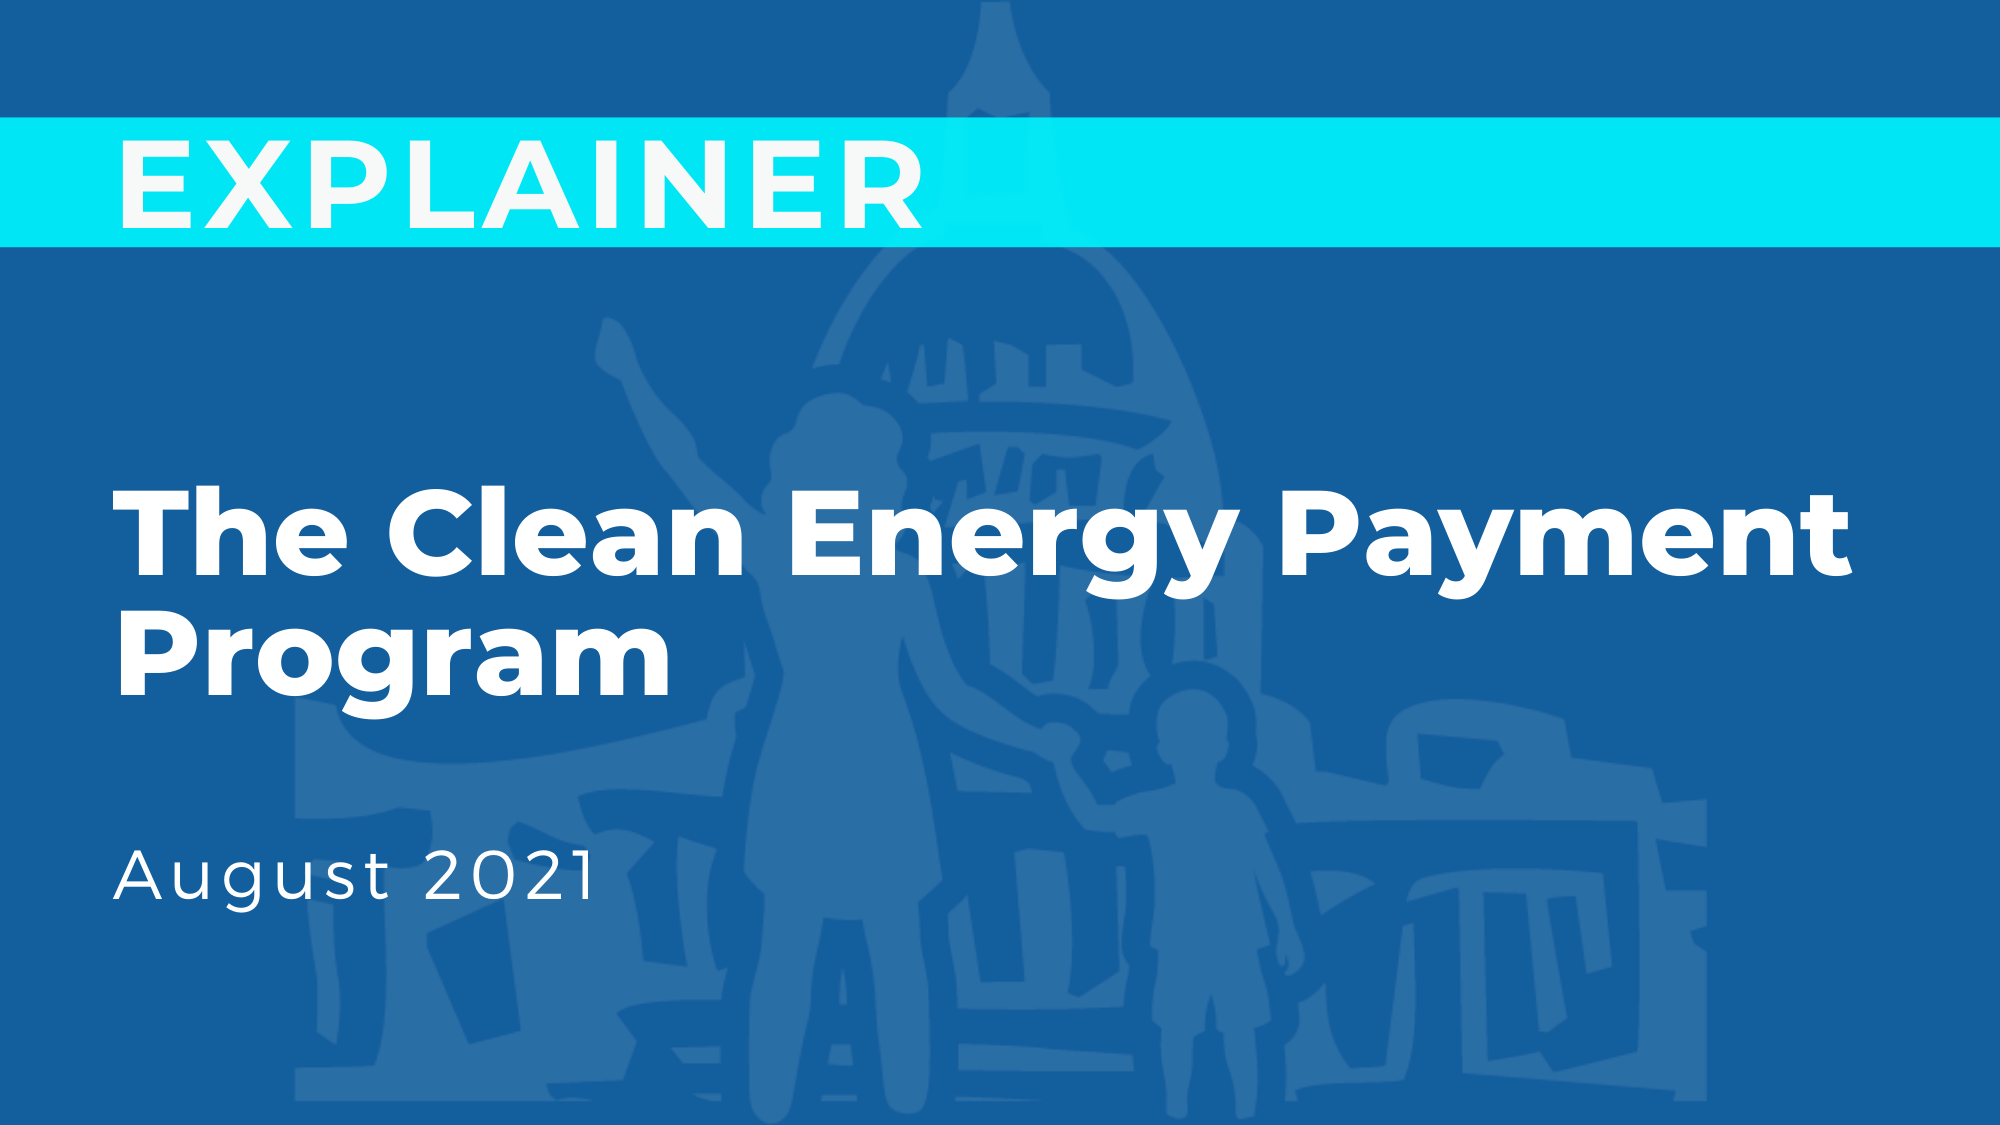 The Clean Energy Payment Program